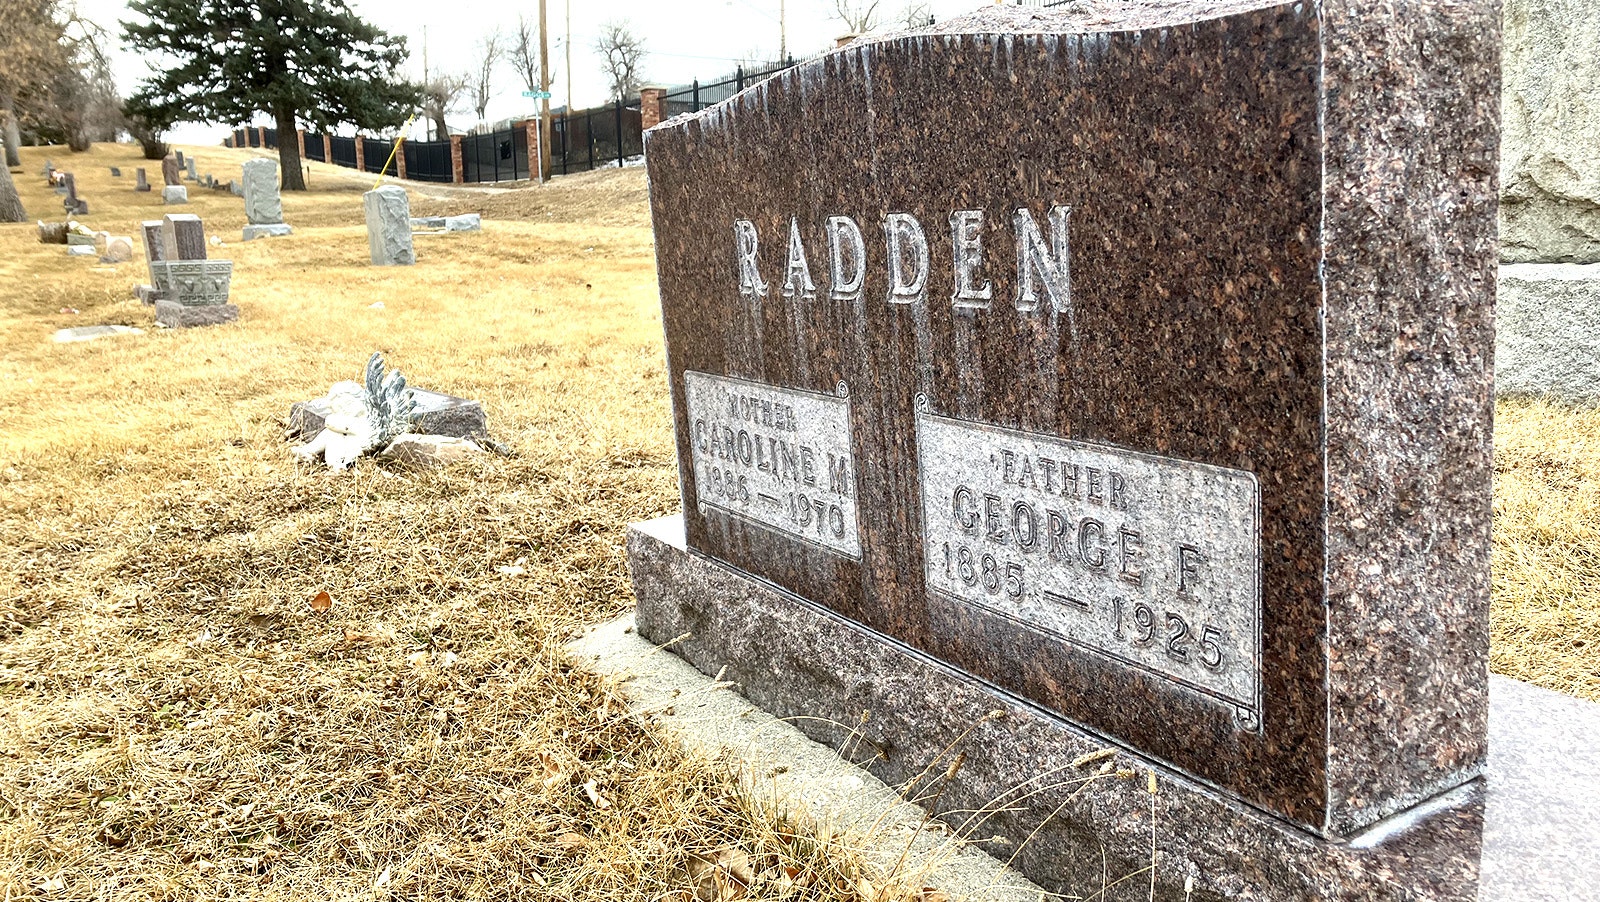 George Radden’s body was initially buried in Arcadia, Iowa. When his wife, Caroline, died in 1970, the family had his body moved to Casper to be next to her. They are buried in Highland Cemetery in Casper.